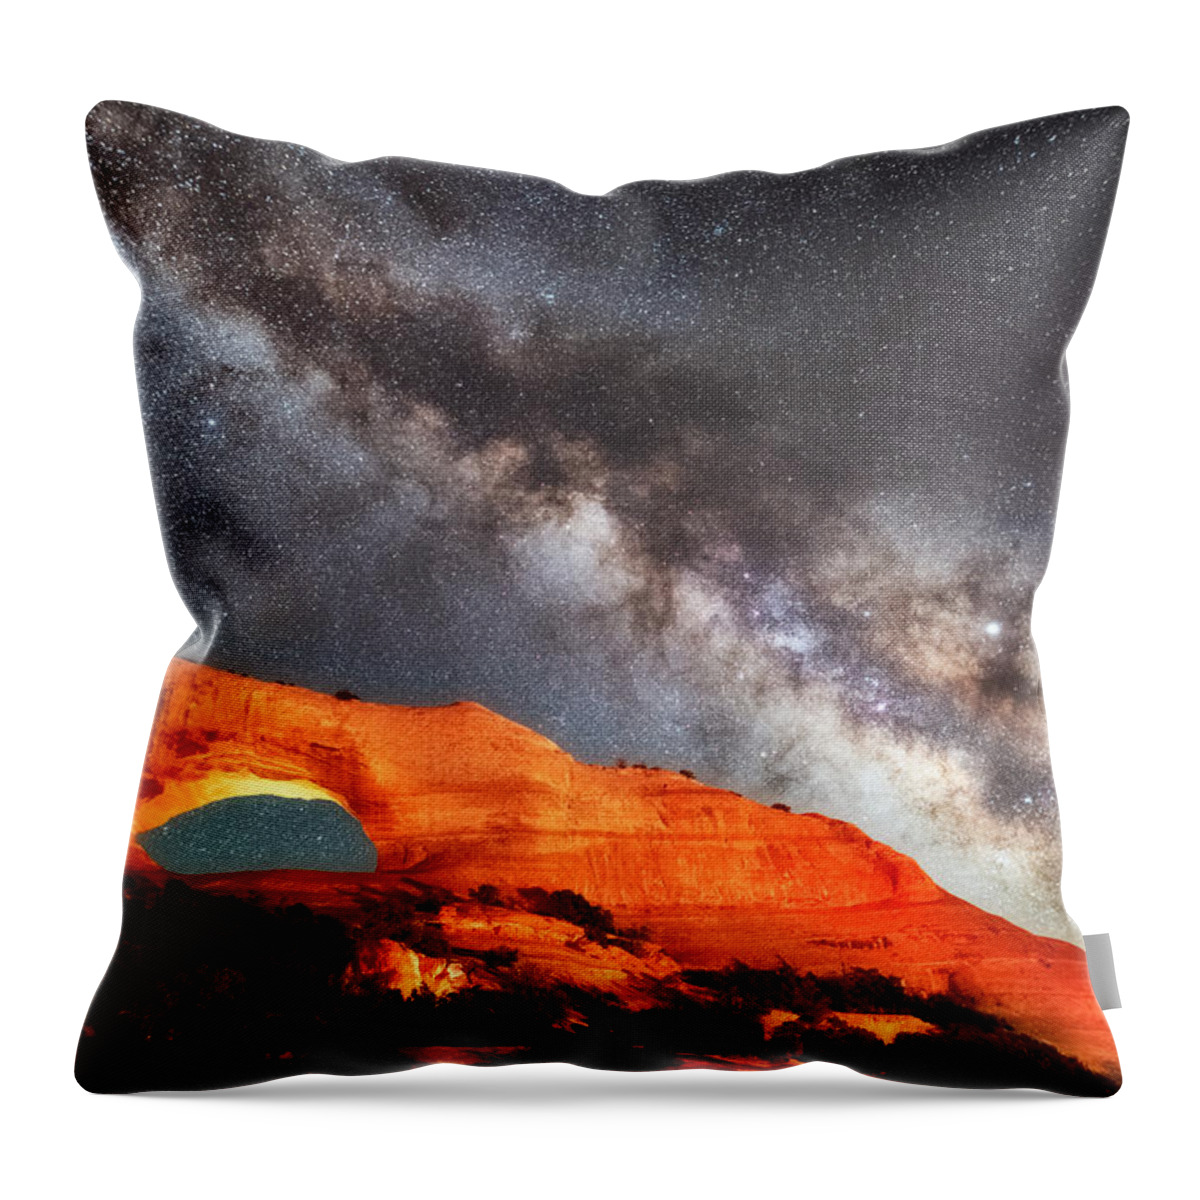 Archie Throw Pillow featuring the photograph Archie by Russell Pugh